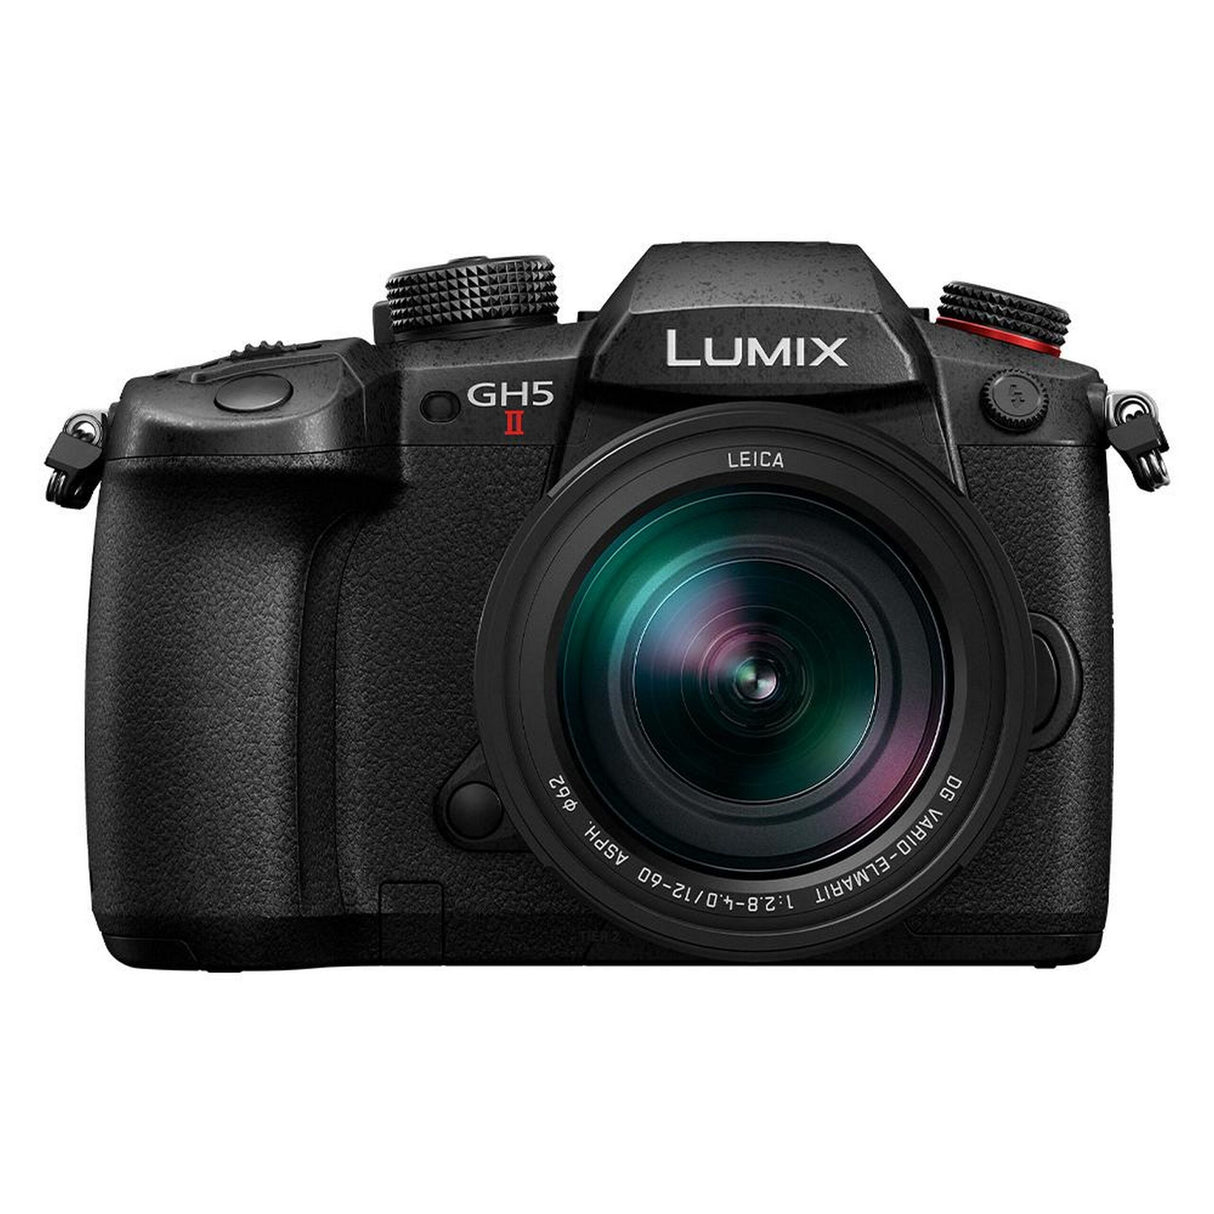 Panasonic LUMIX GH5M2 4K Mirrorless Camera with Live Streaming and Leica Lens